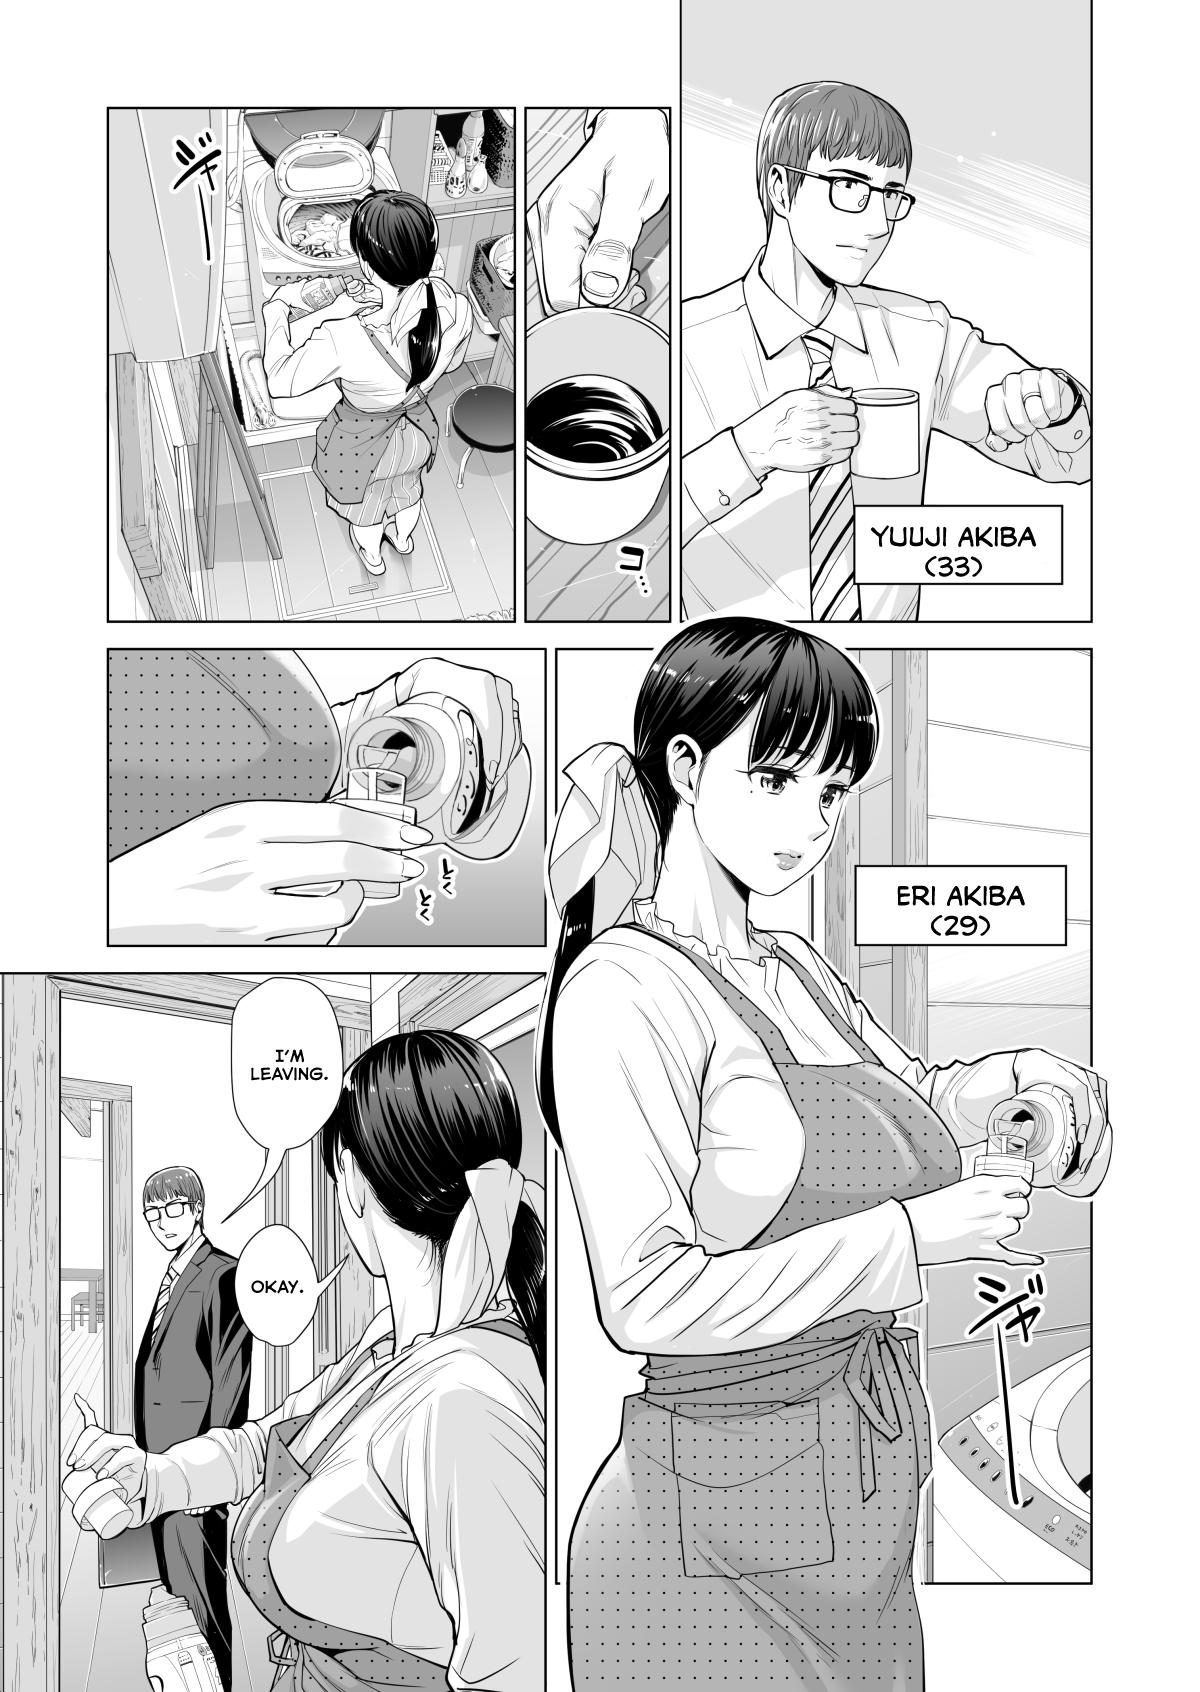 [HGT Lab (Tsusauto)] Tsukiyo no Midare Zake (Zenpen) Moonlit Intoxication ~ A Housewife Stolen by a Coworker Besides her Blackout Drunk Husband ~ Chapter 1 [English] 5